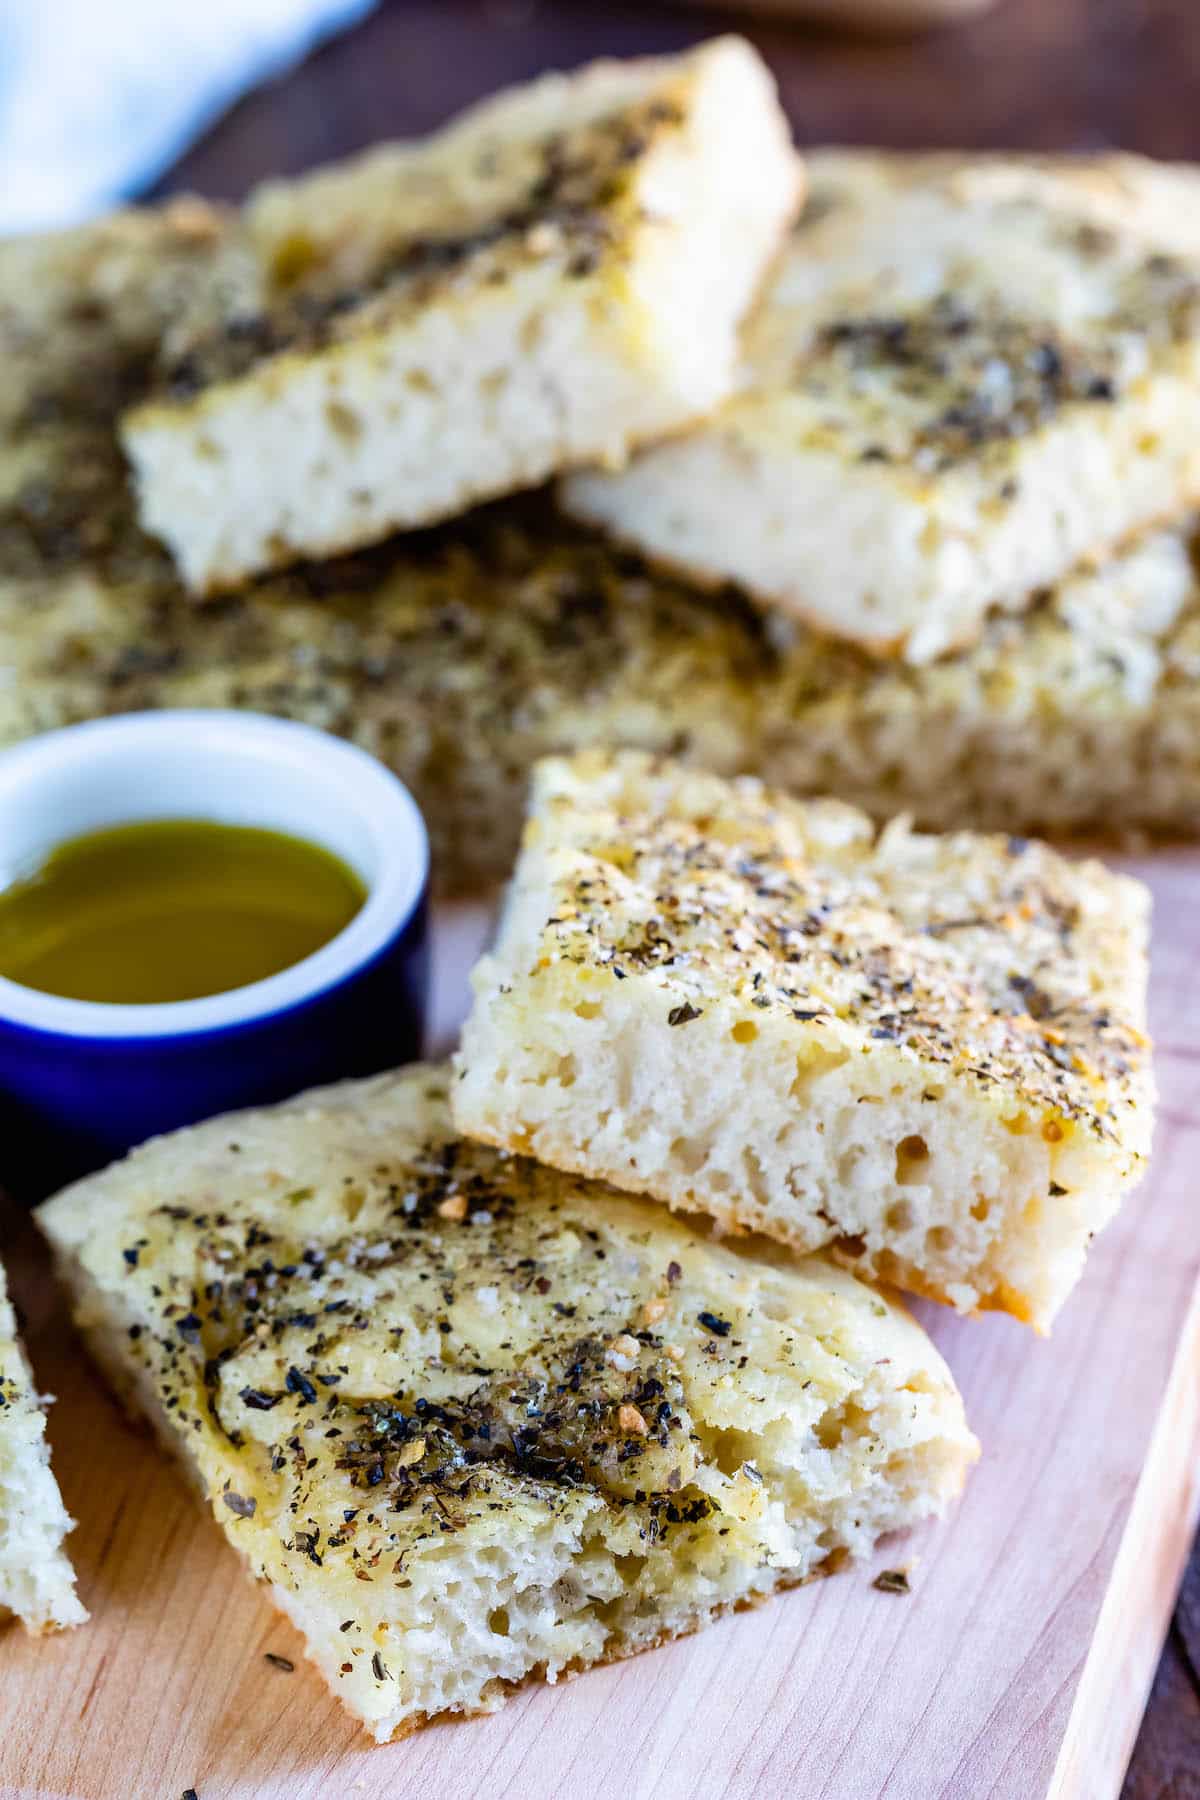 staked square slices of bread with oil and herbs on top.